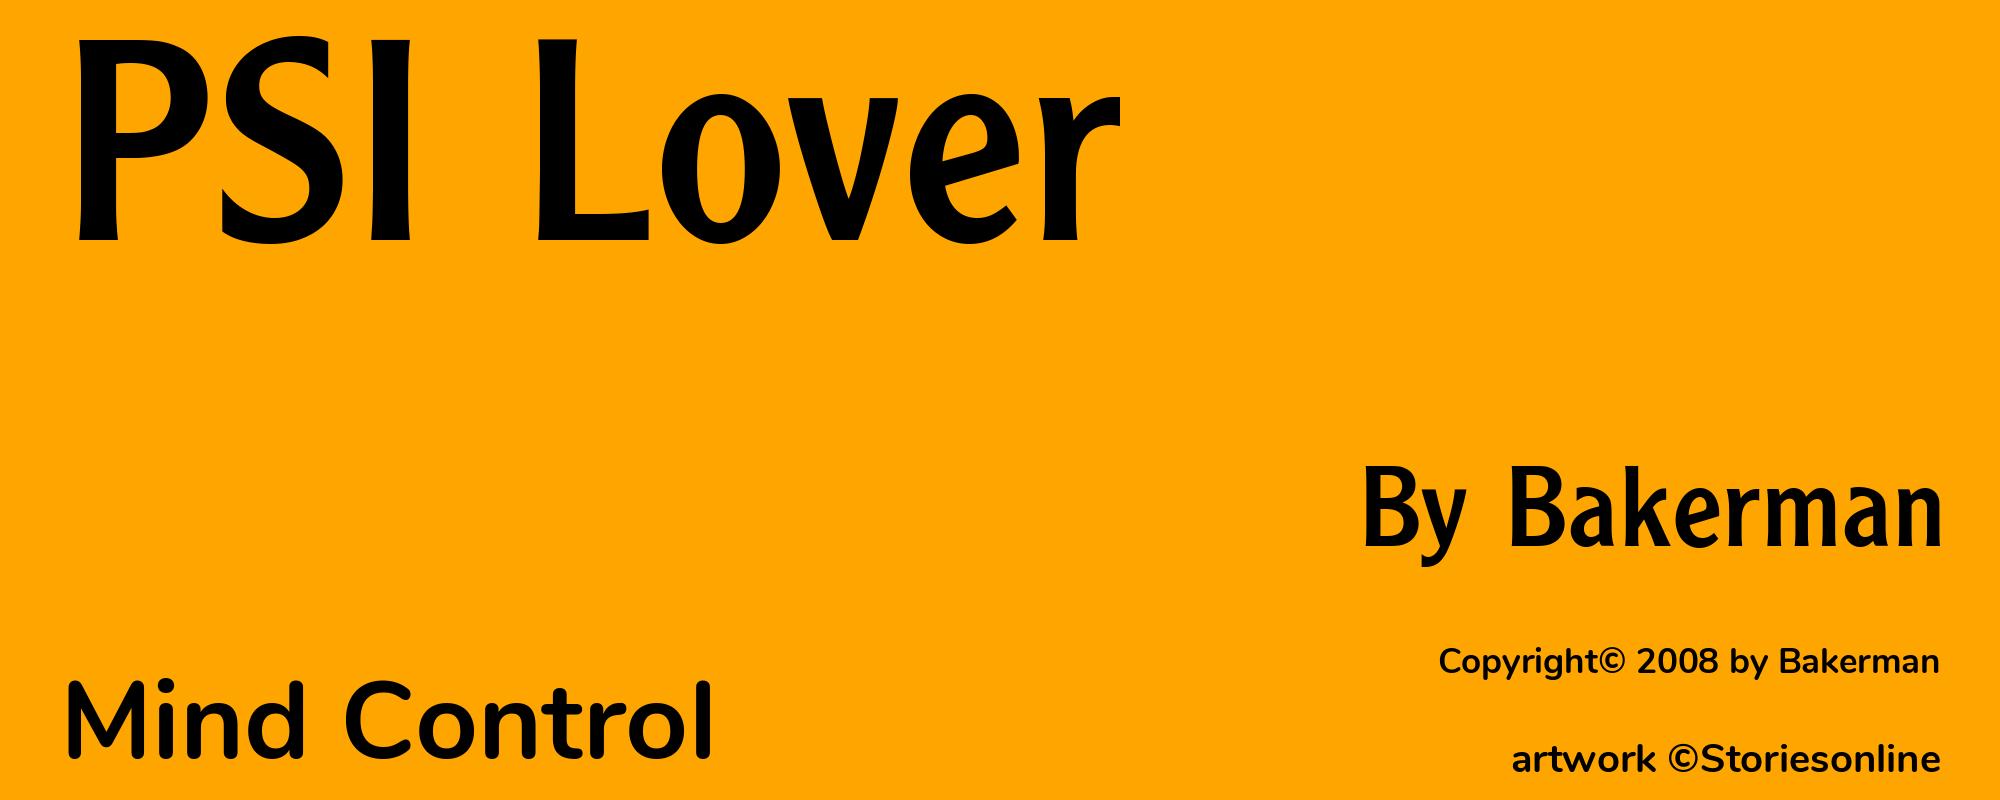 PSI Lover - Cover